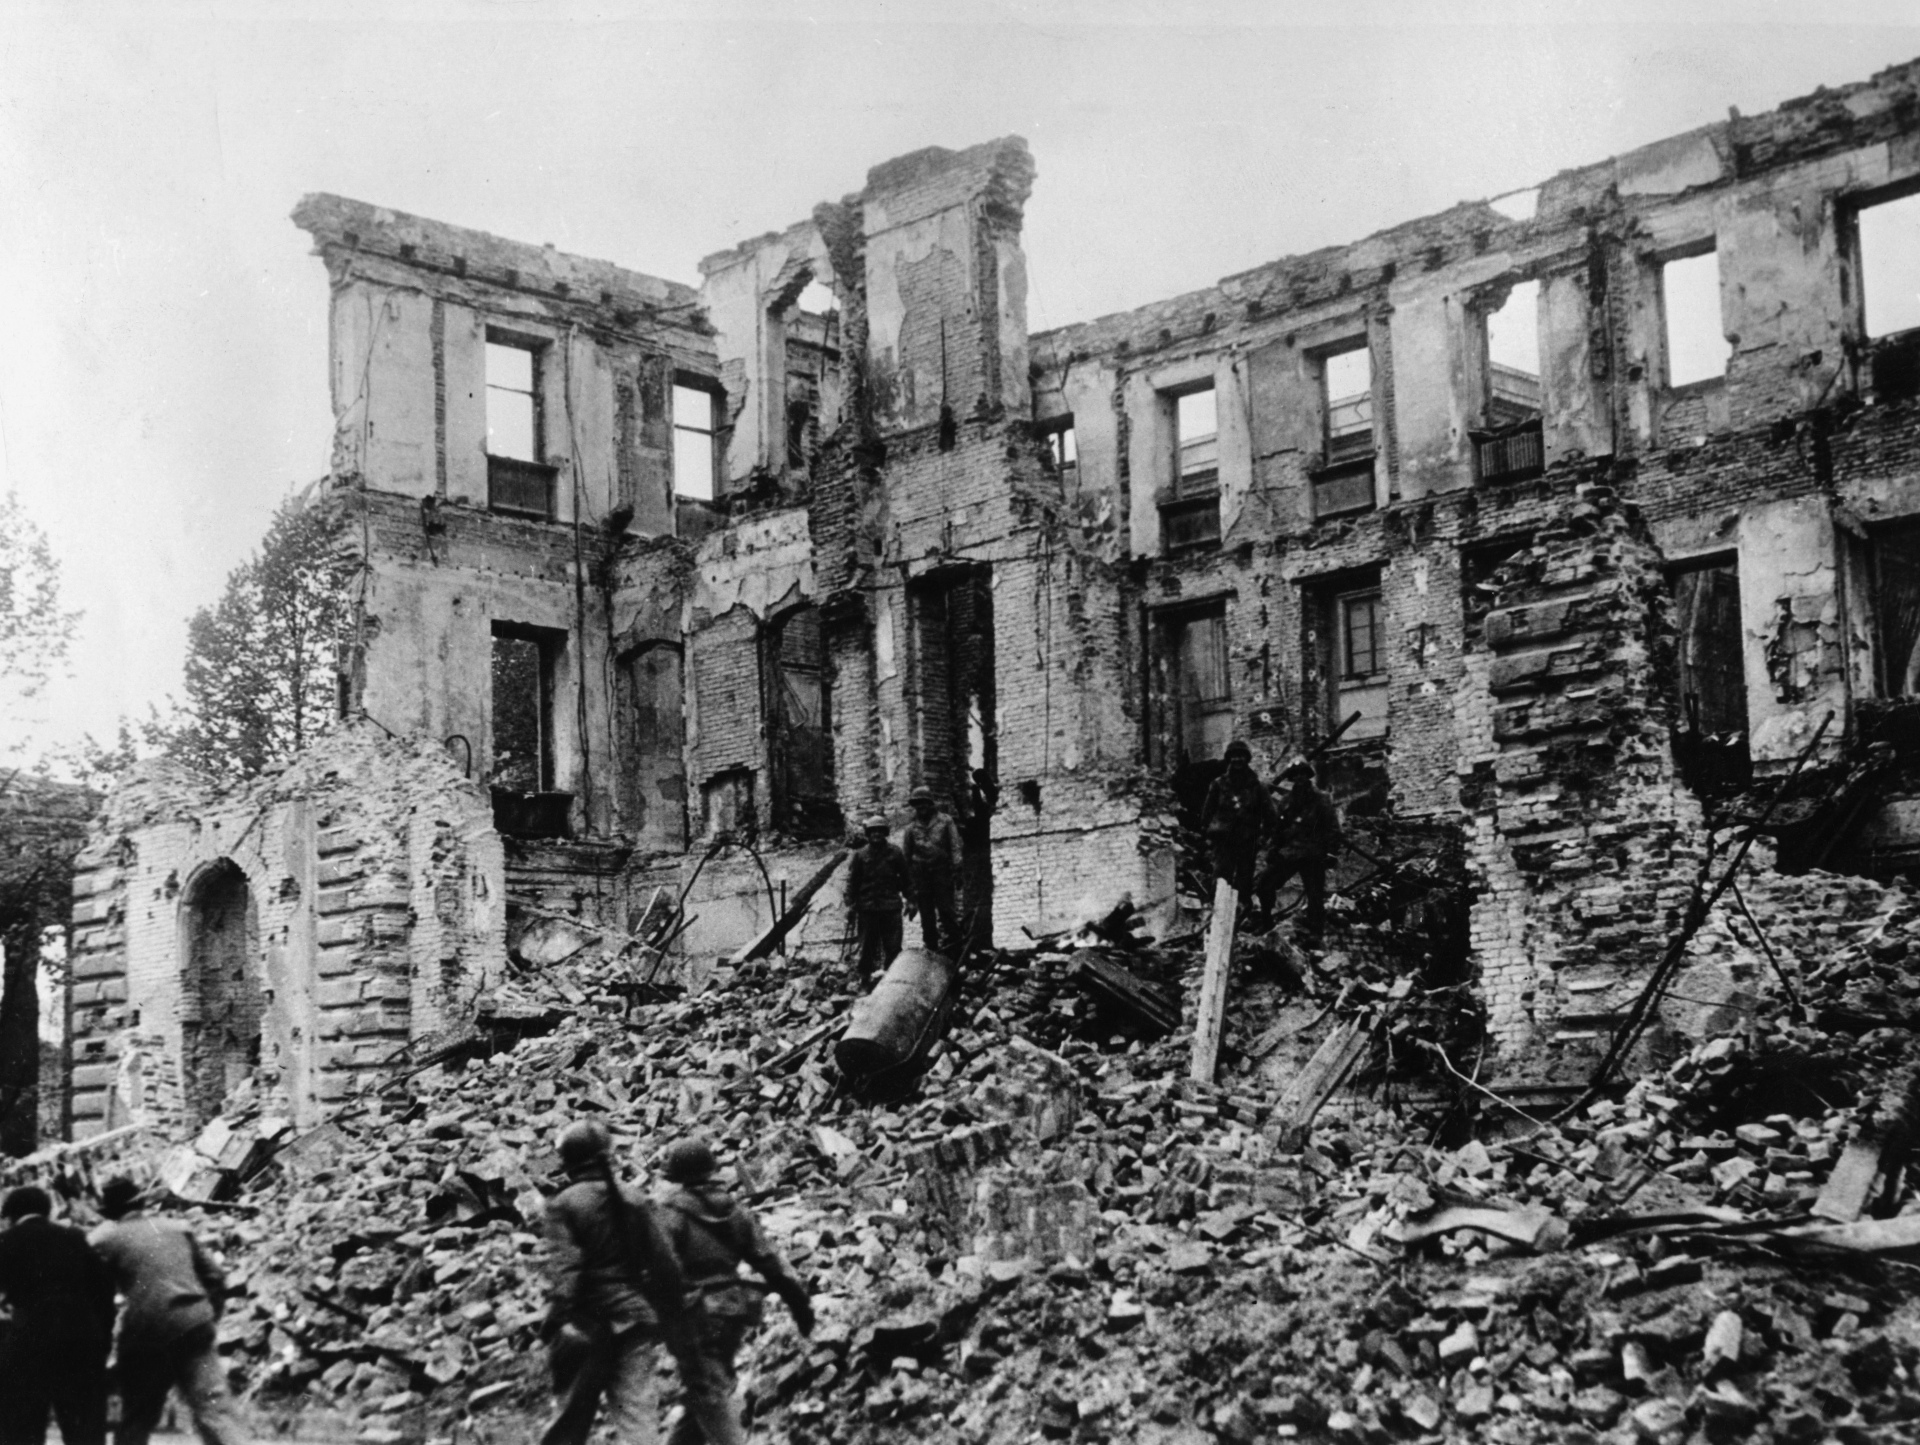 Bombed-out remains of the facade of a house with a pile of rubble lying in front of it.